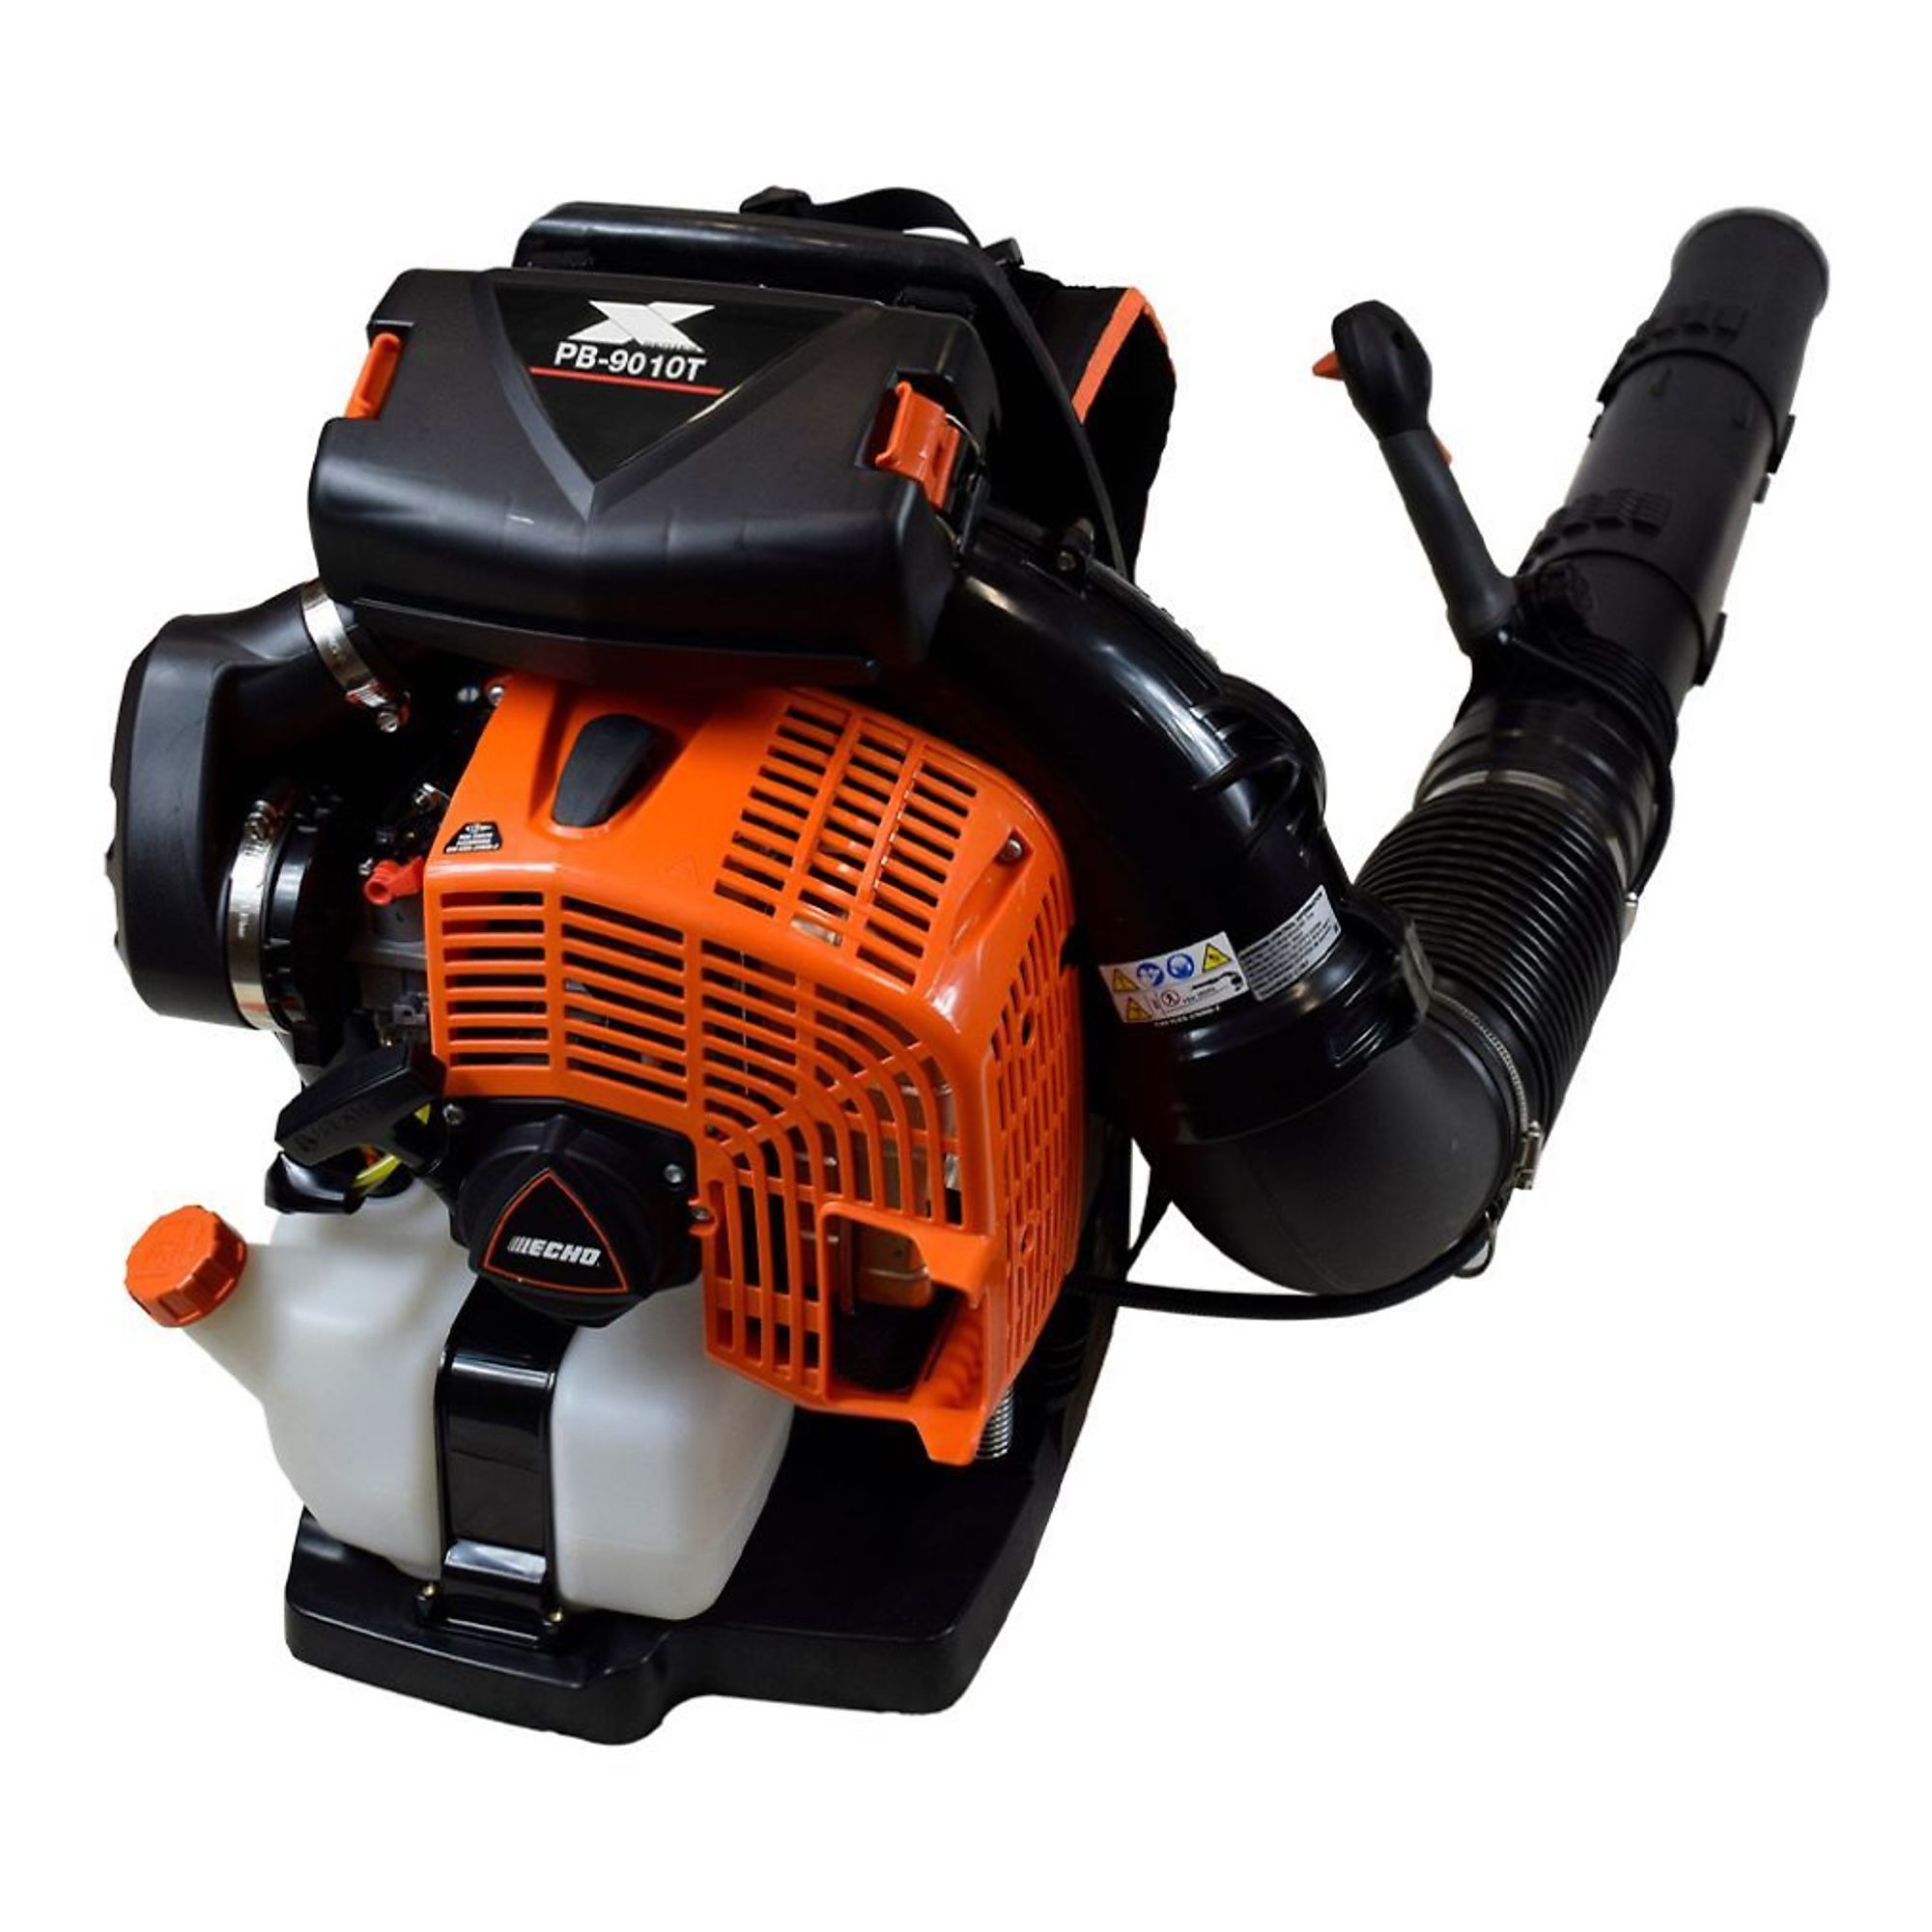 ECHO X Series, Gas-Powered Backpack Blower with Tube Throttle, Blower Type Backpack, Model PB-9010T